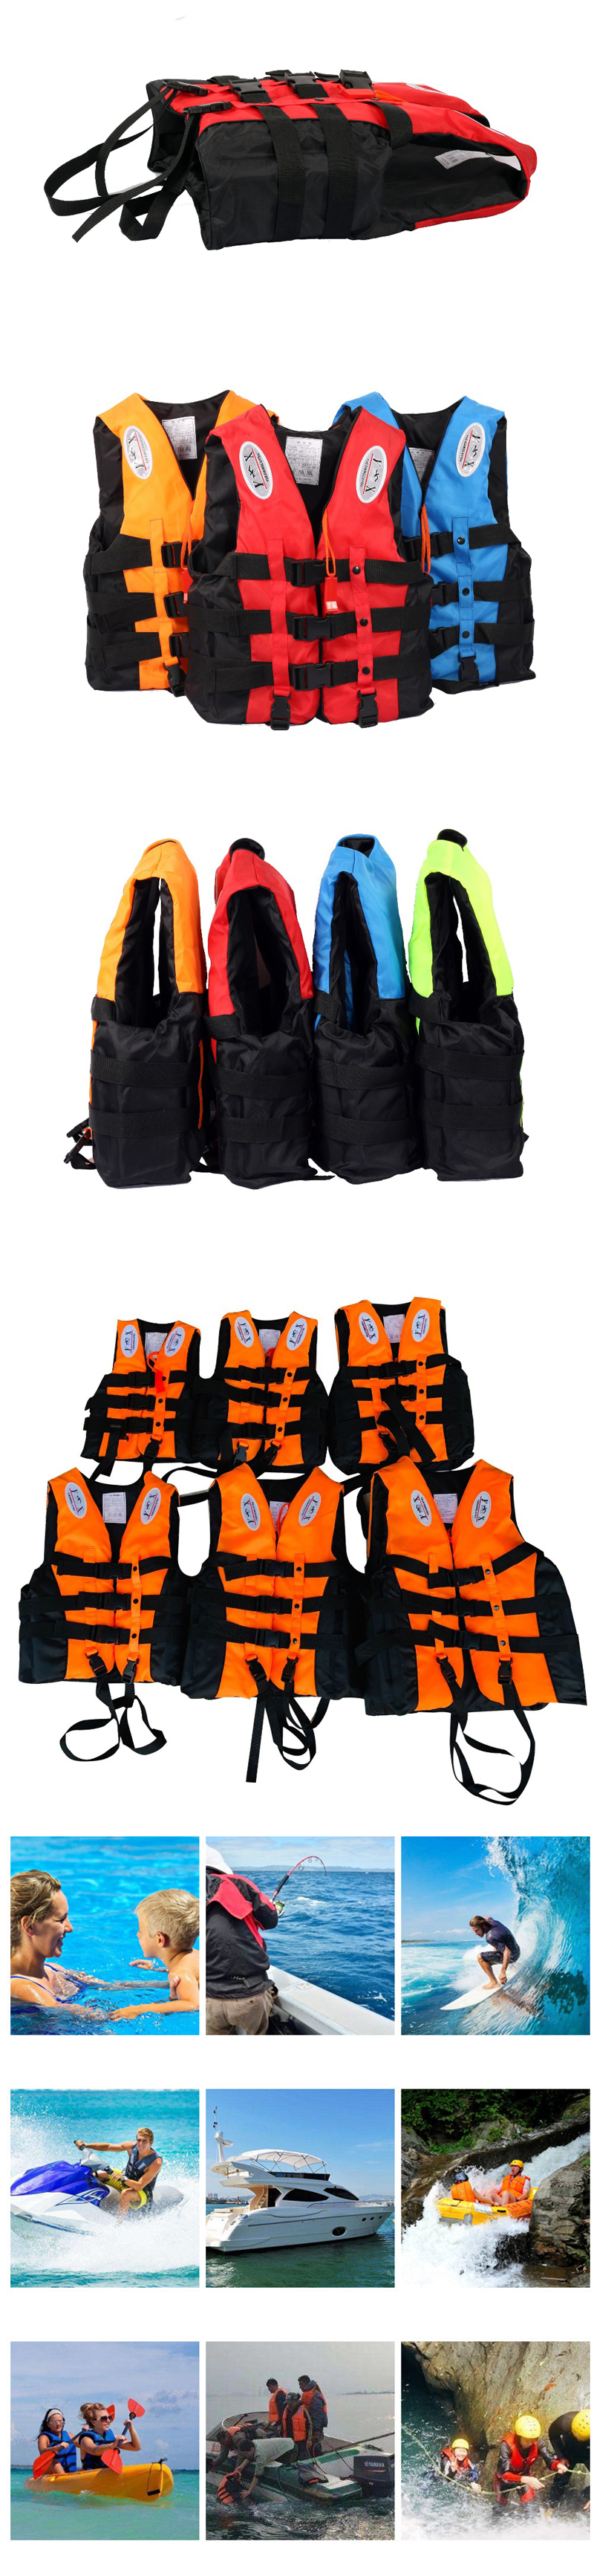 OWLWIN-Universal-Outdoor--Life-Jacket-Swimming-Boating-Skiing-Driving-Vest-Survival-Suit-for-Adult-C-1729345-4